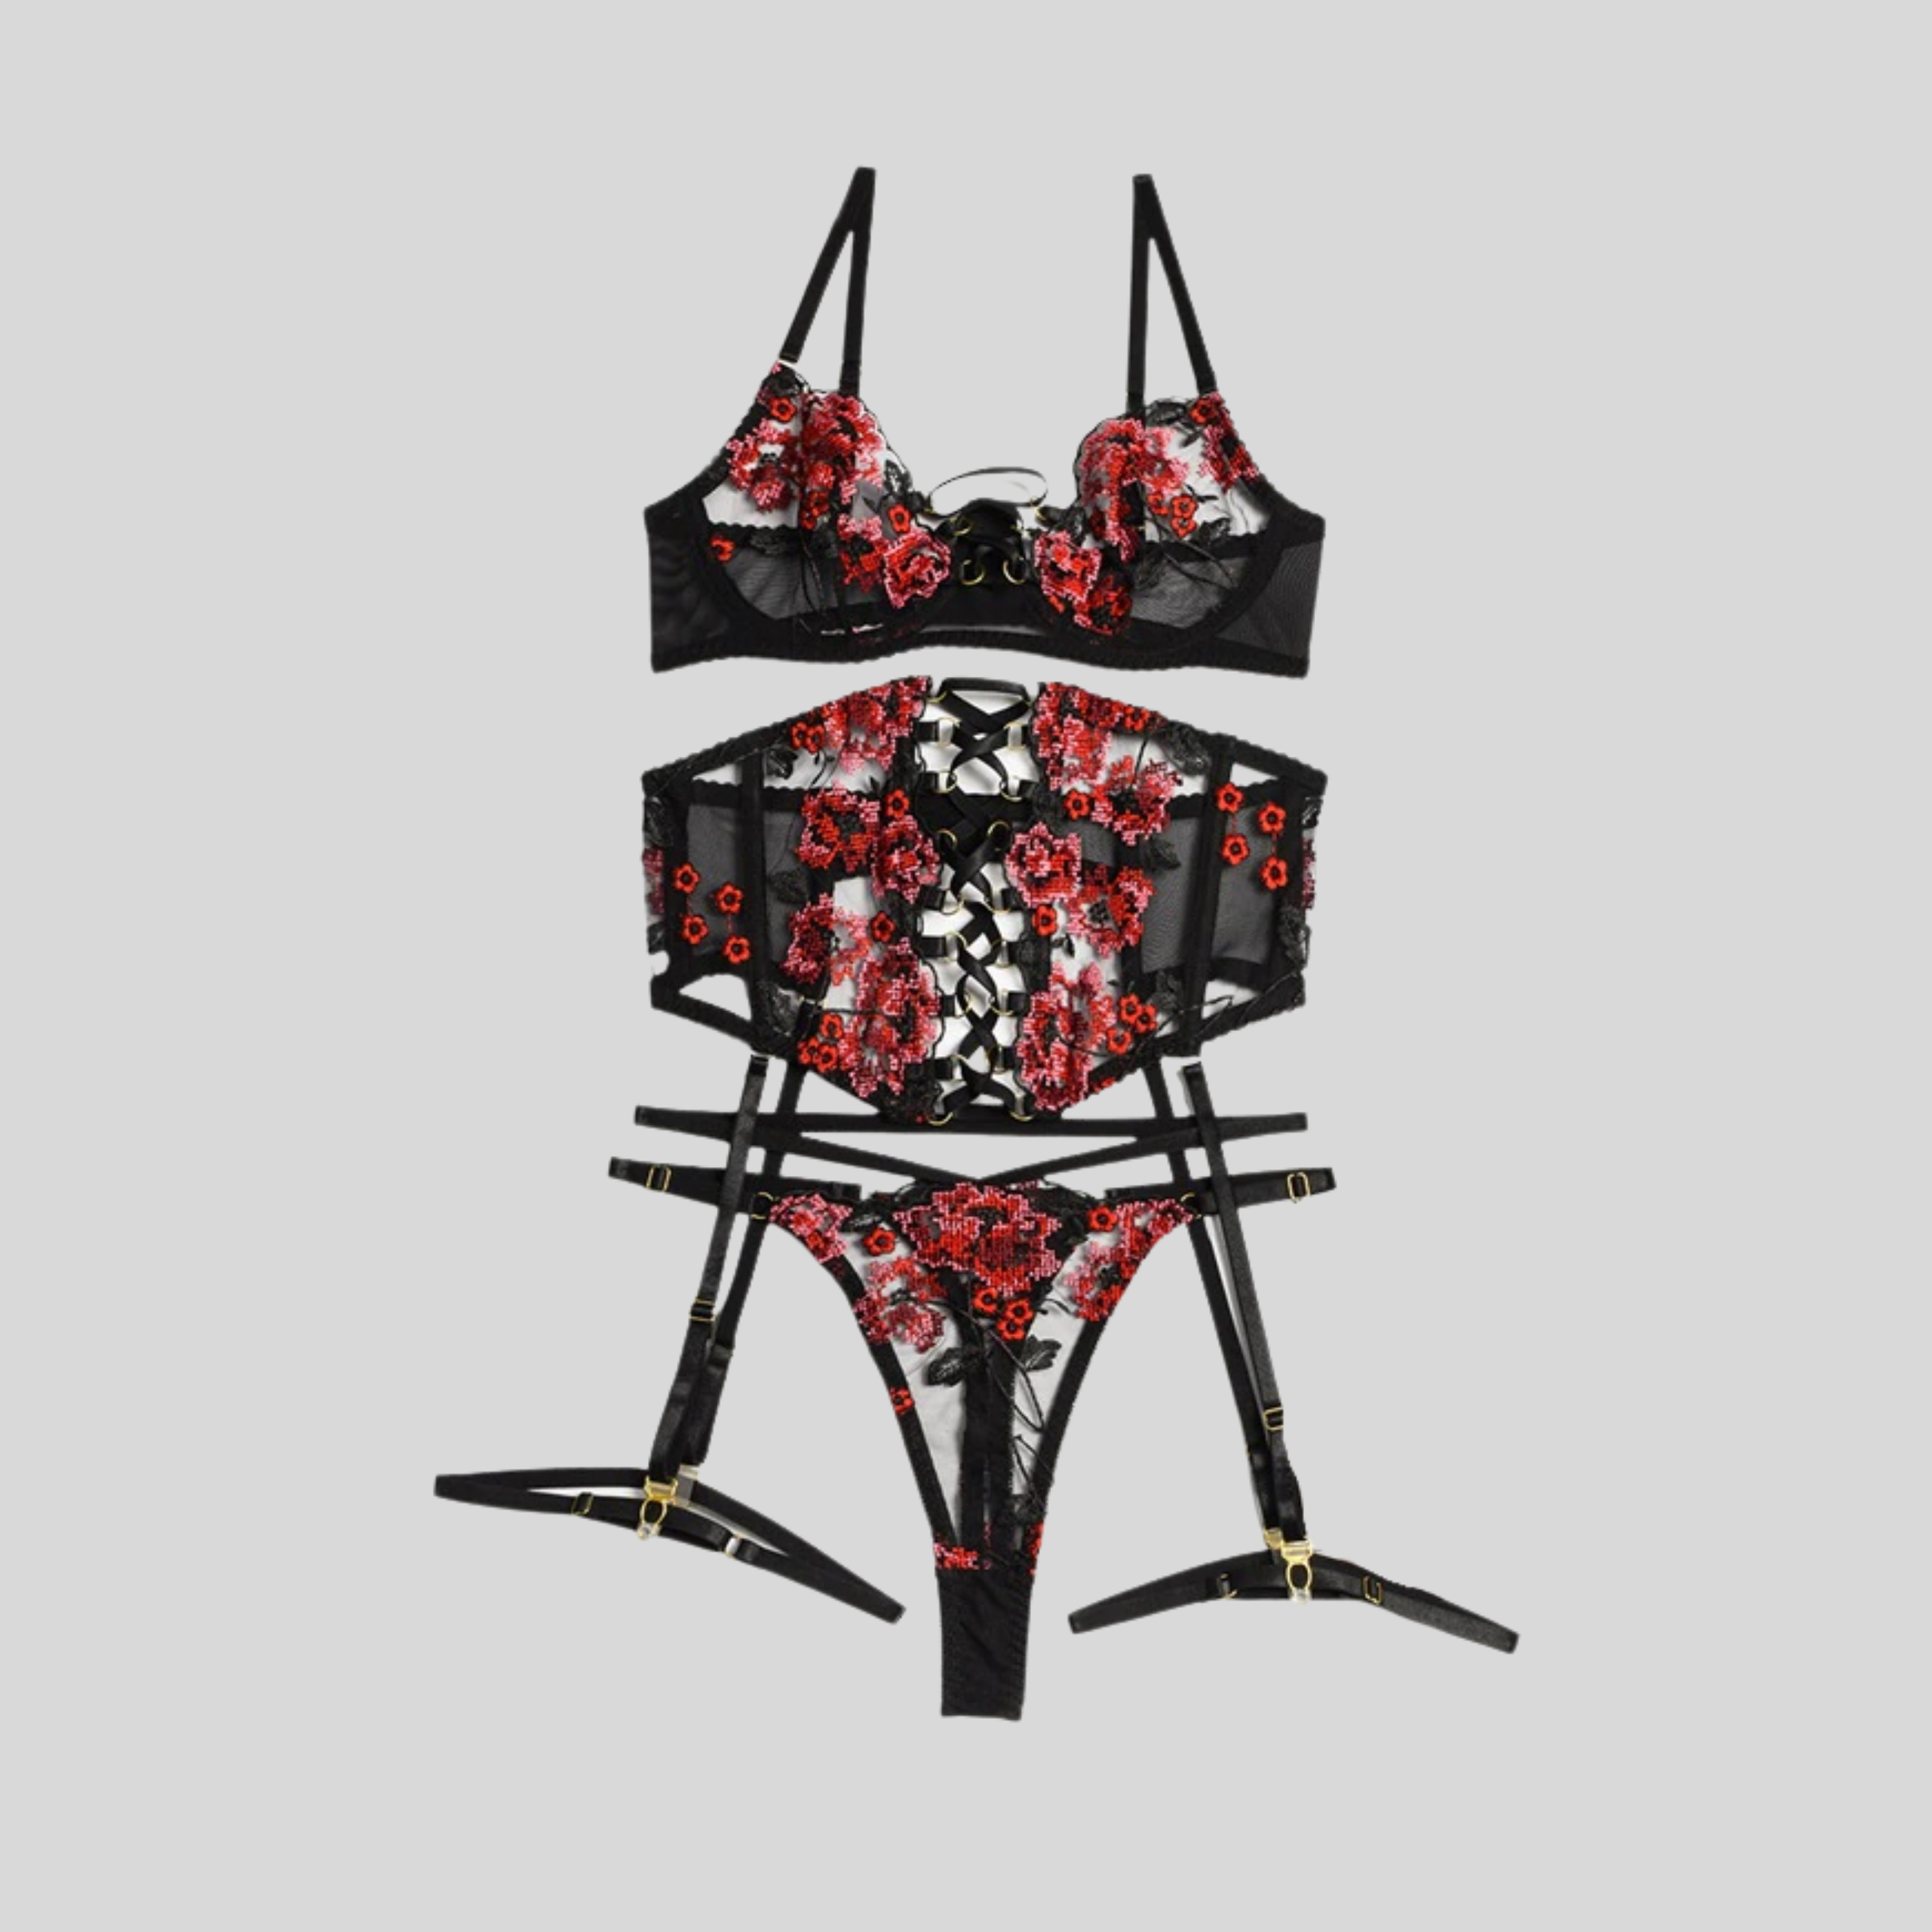 Buy Red & Black Lingerie Sets for Women by AROUSY Online